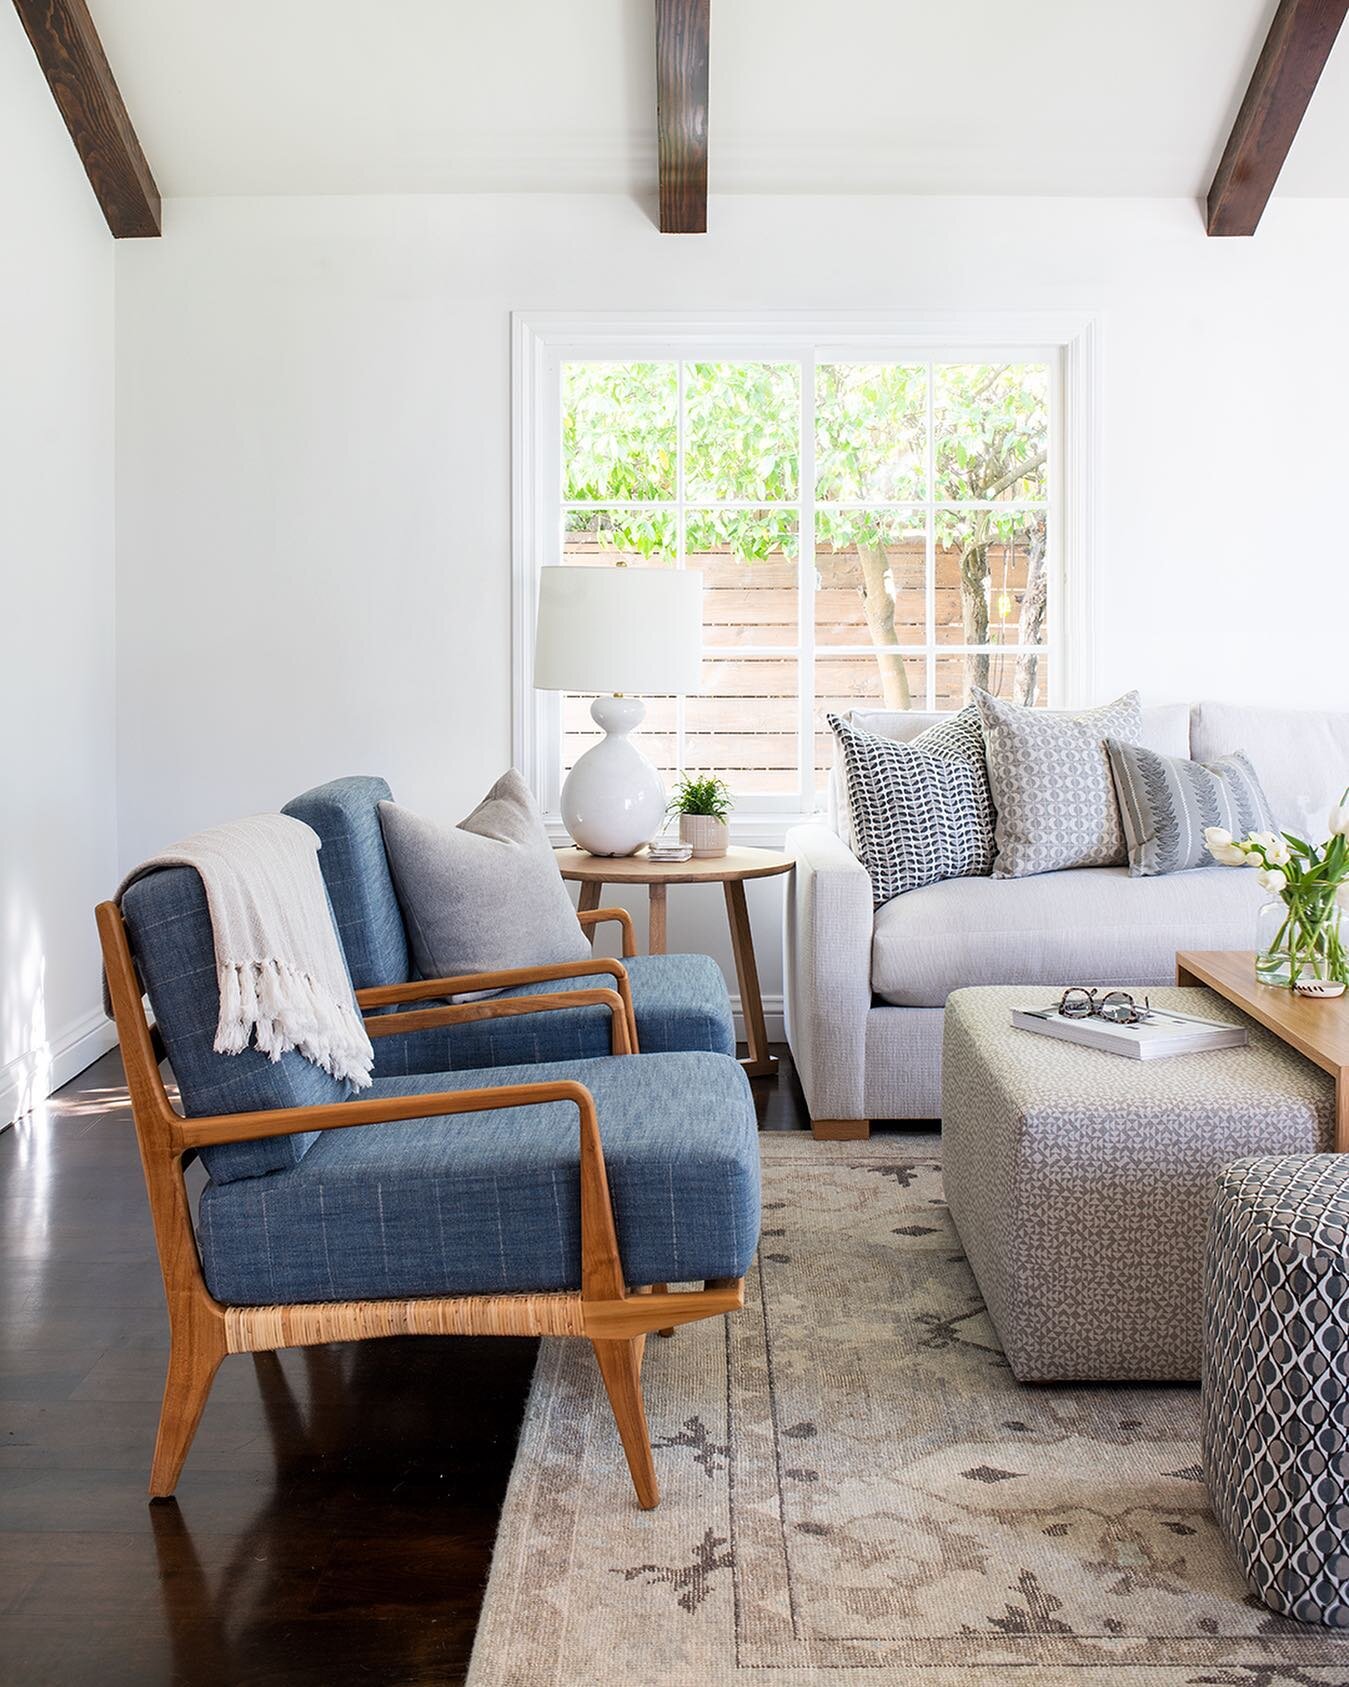 Cozy living room at our Lunada Bay project with all of my favorite fabrics. 

Interiors @juliedonovandesign
Photo @laurenpressey 

#interior #homedecor #decor #interiors #homedesign #furniture #decoration #interiordecor #interiorstyling #interior4all